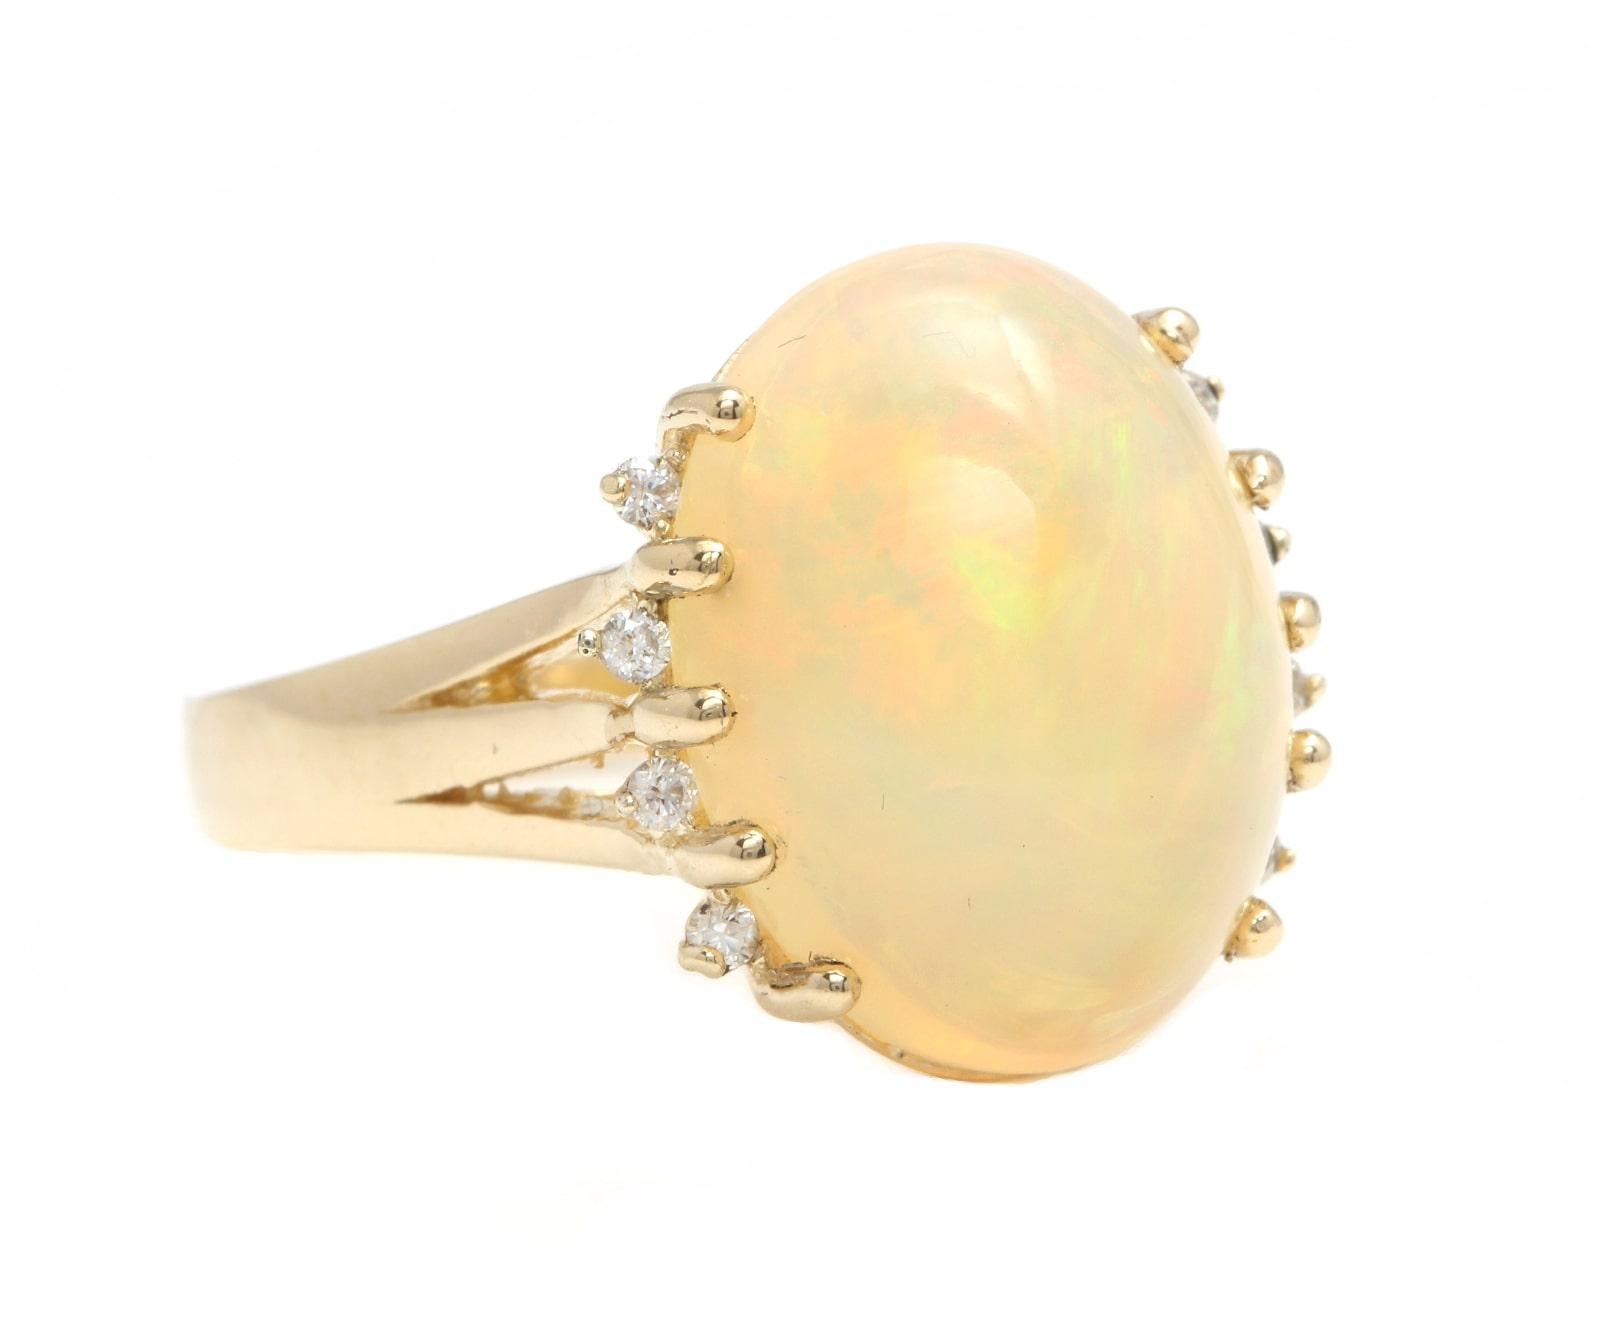 8.20 Carats Natural  Impressive Ethiopian Opal and Diamond 14K Solid Yellow Gold Ring

The opal has beautiful fire, pictures don't show the whole beauty of the opal!

Suggested Replacement Value: $5,500.00

Total Natural Opal Weight is: Approx. 8.00